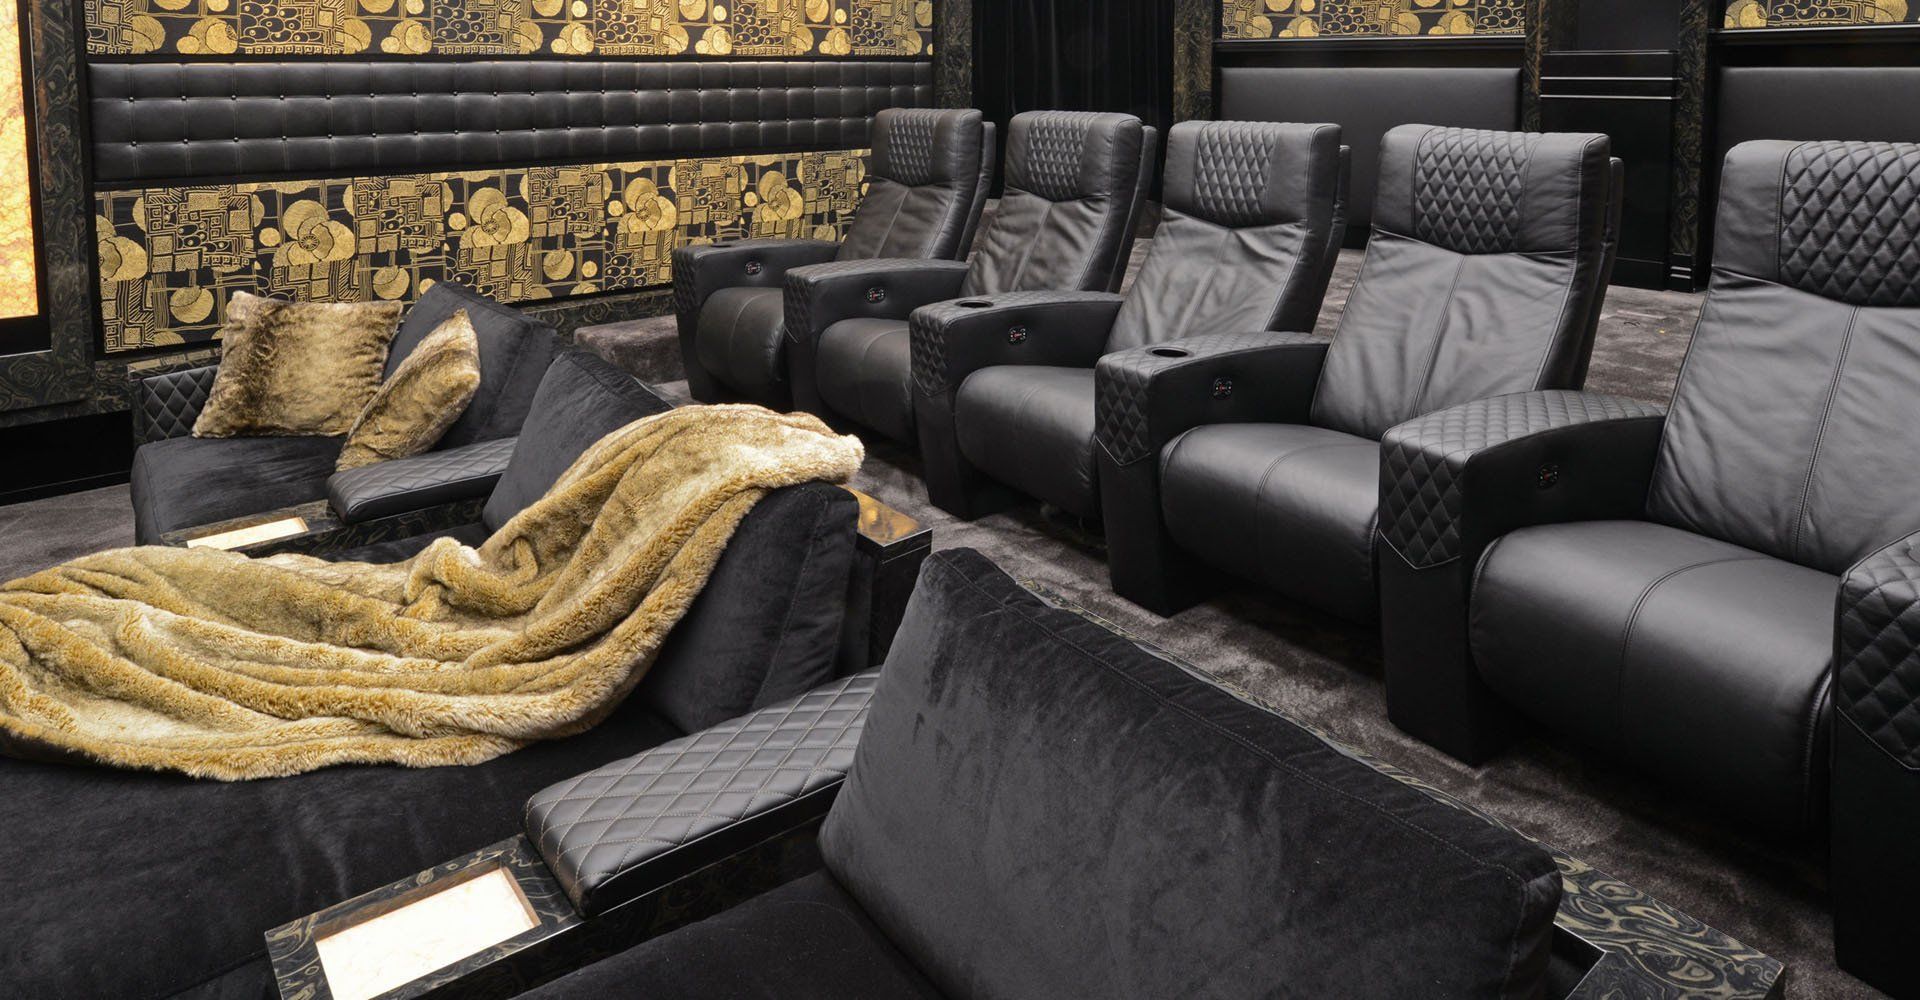 A row of black leather chairs in a theater with a blanket on the floor.